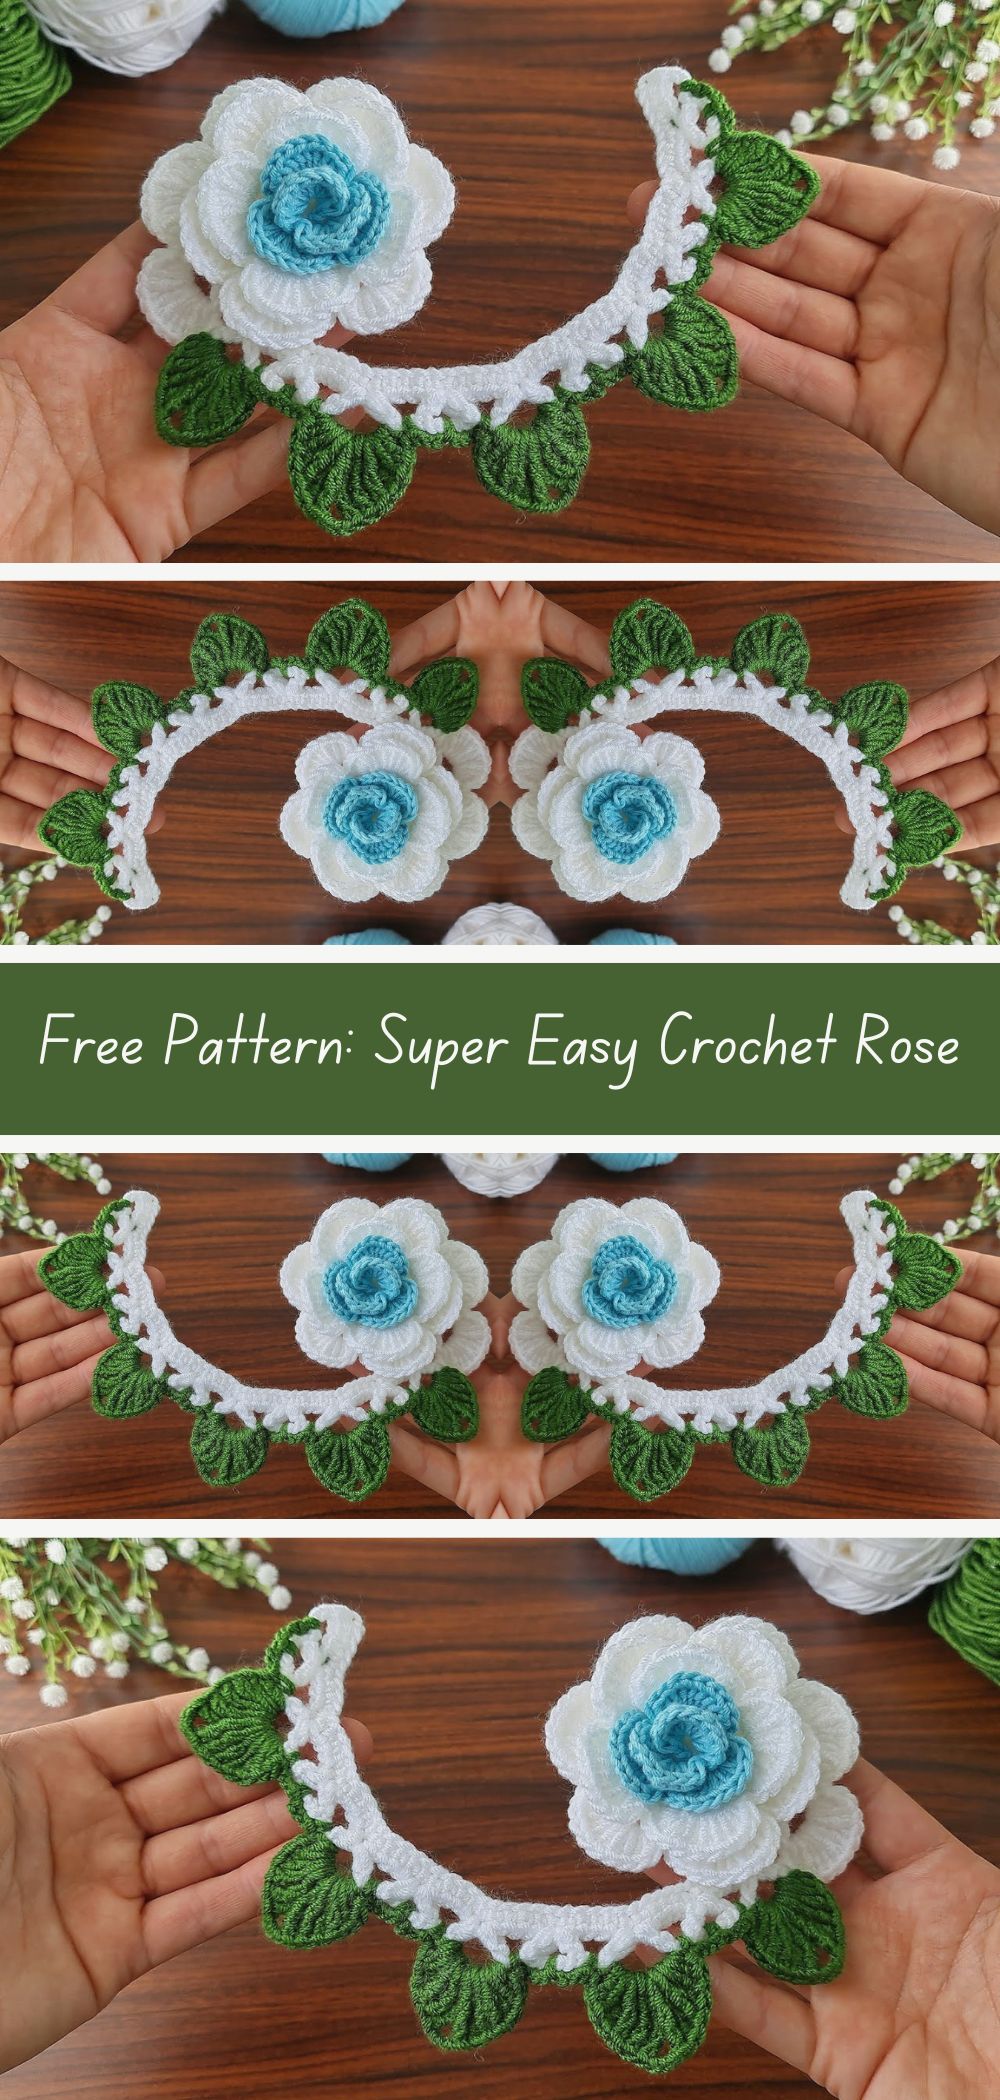 Free Pattern: Super Easy Crochet Rose - Create lovely crochet roses with this simple and free pattern